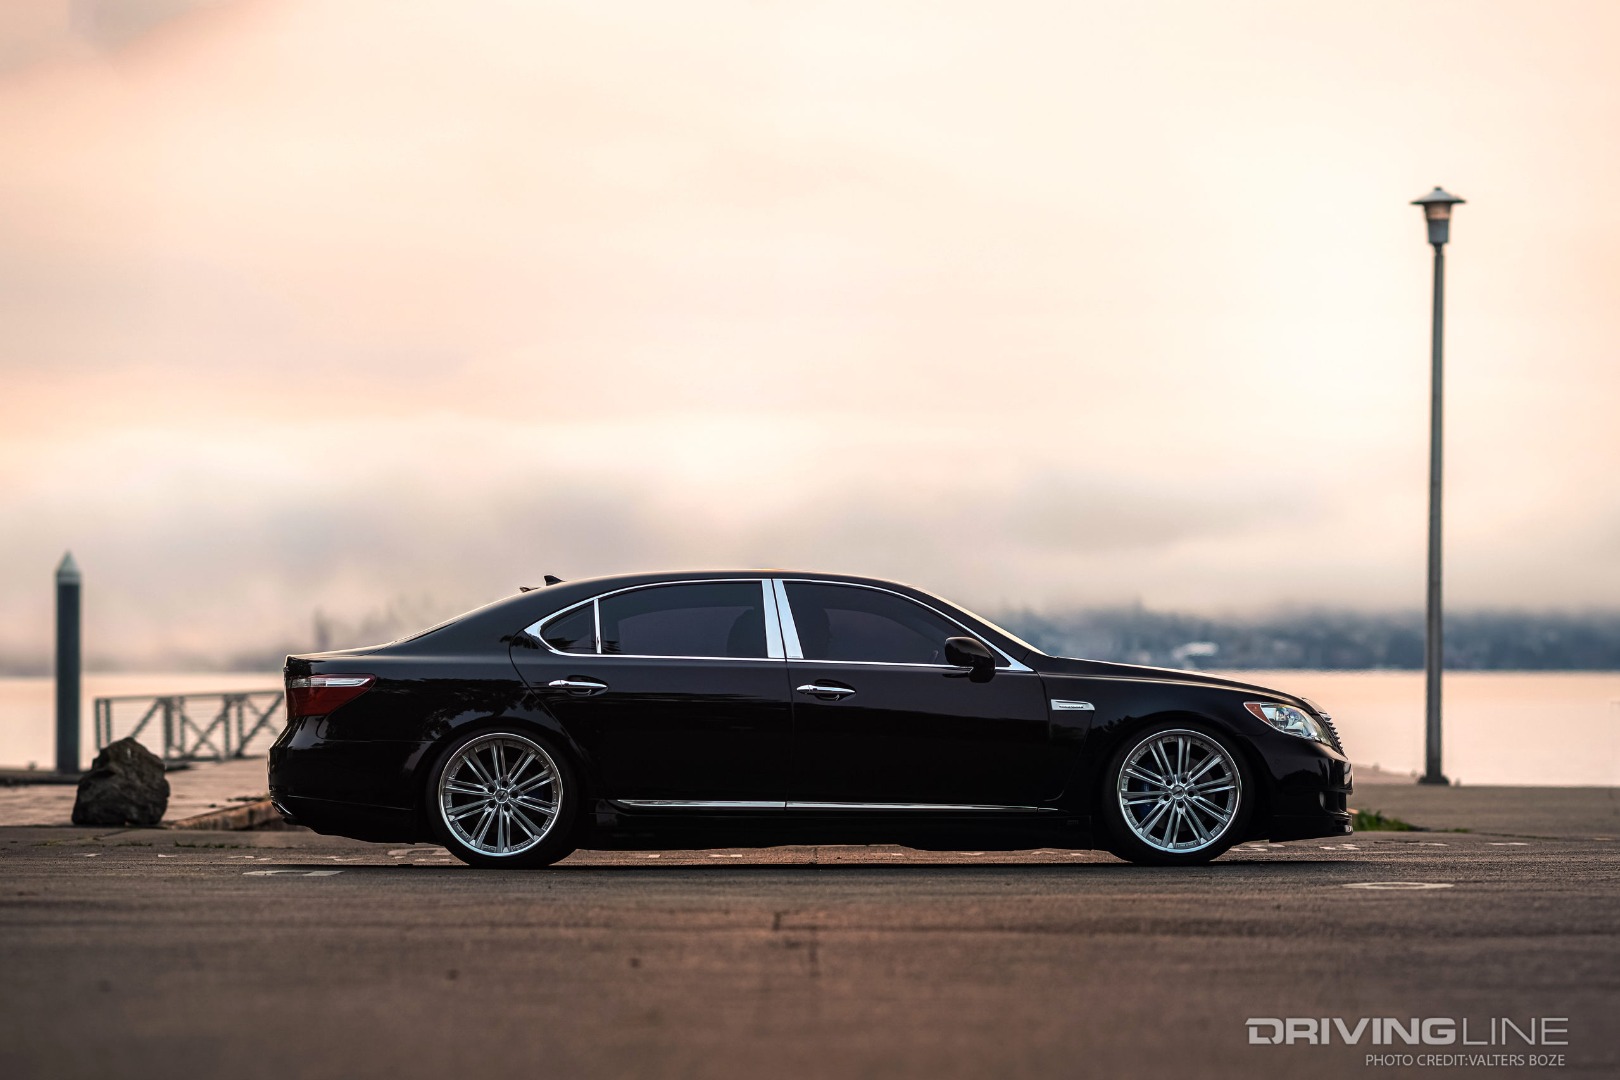 Livin' in Luxury with Lawrence's Lexus LS460L | DrivingLine